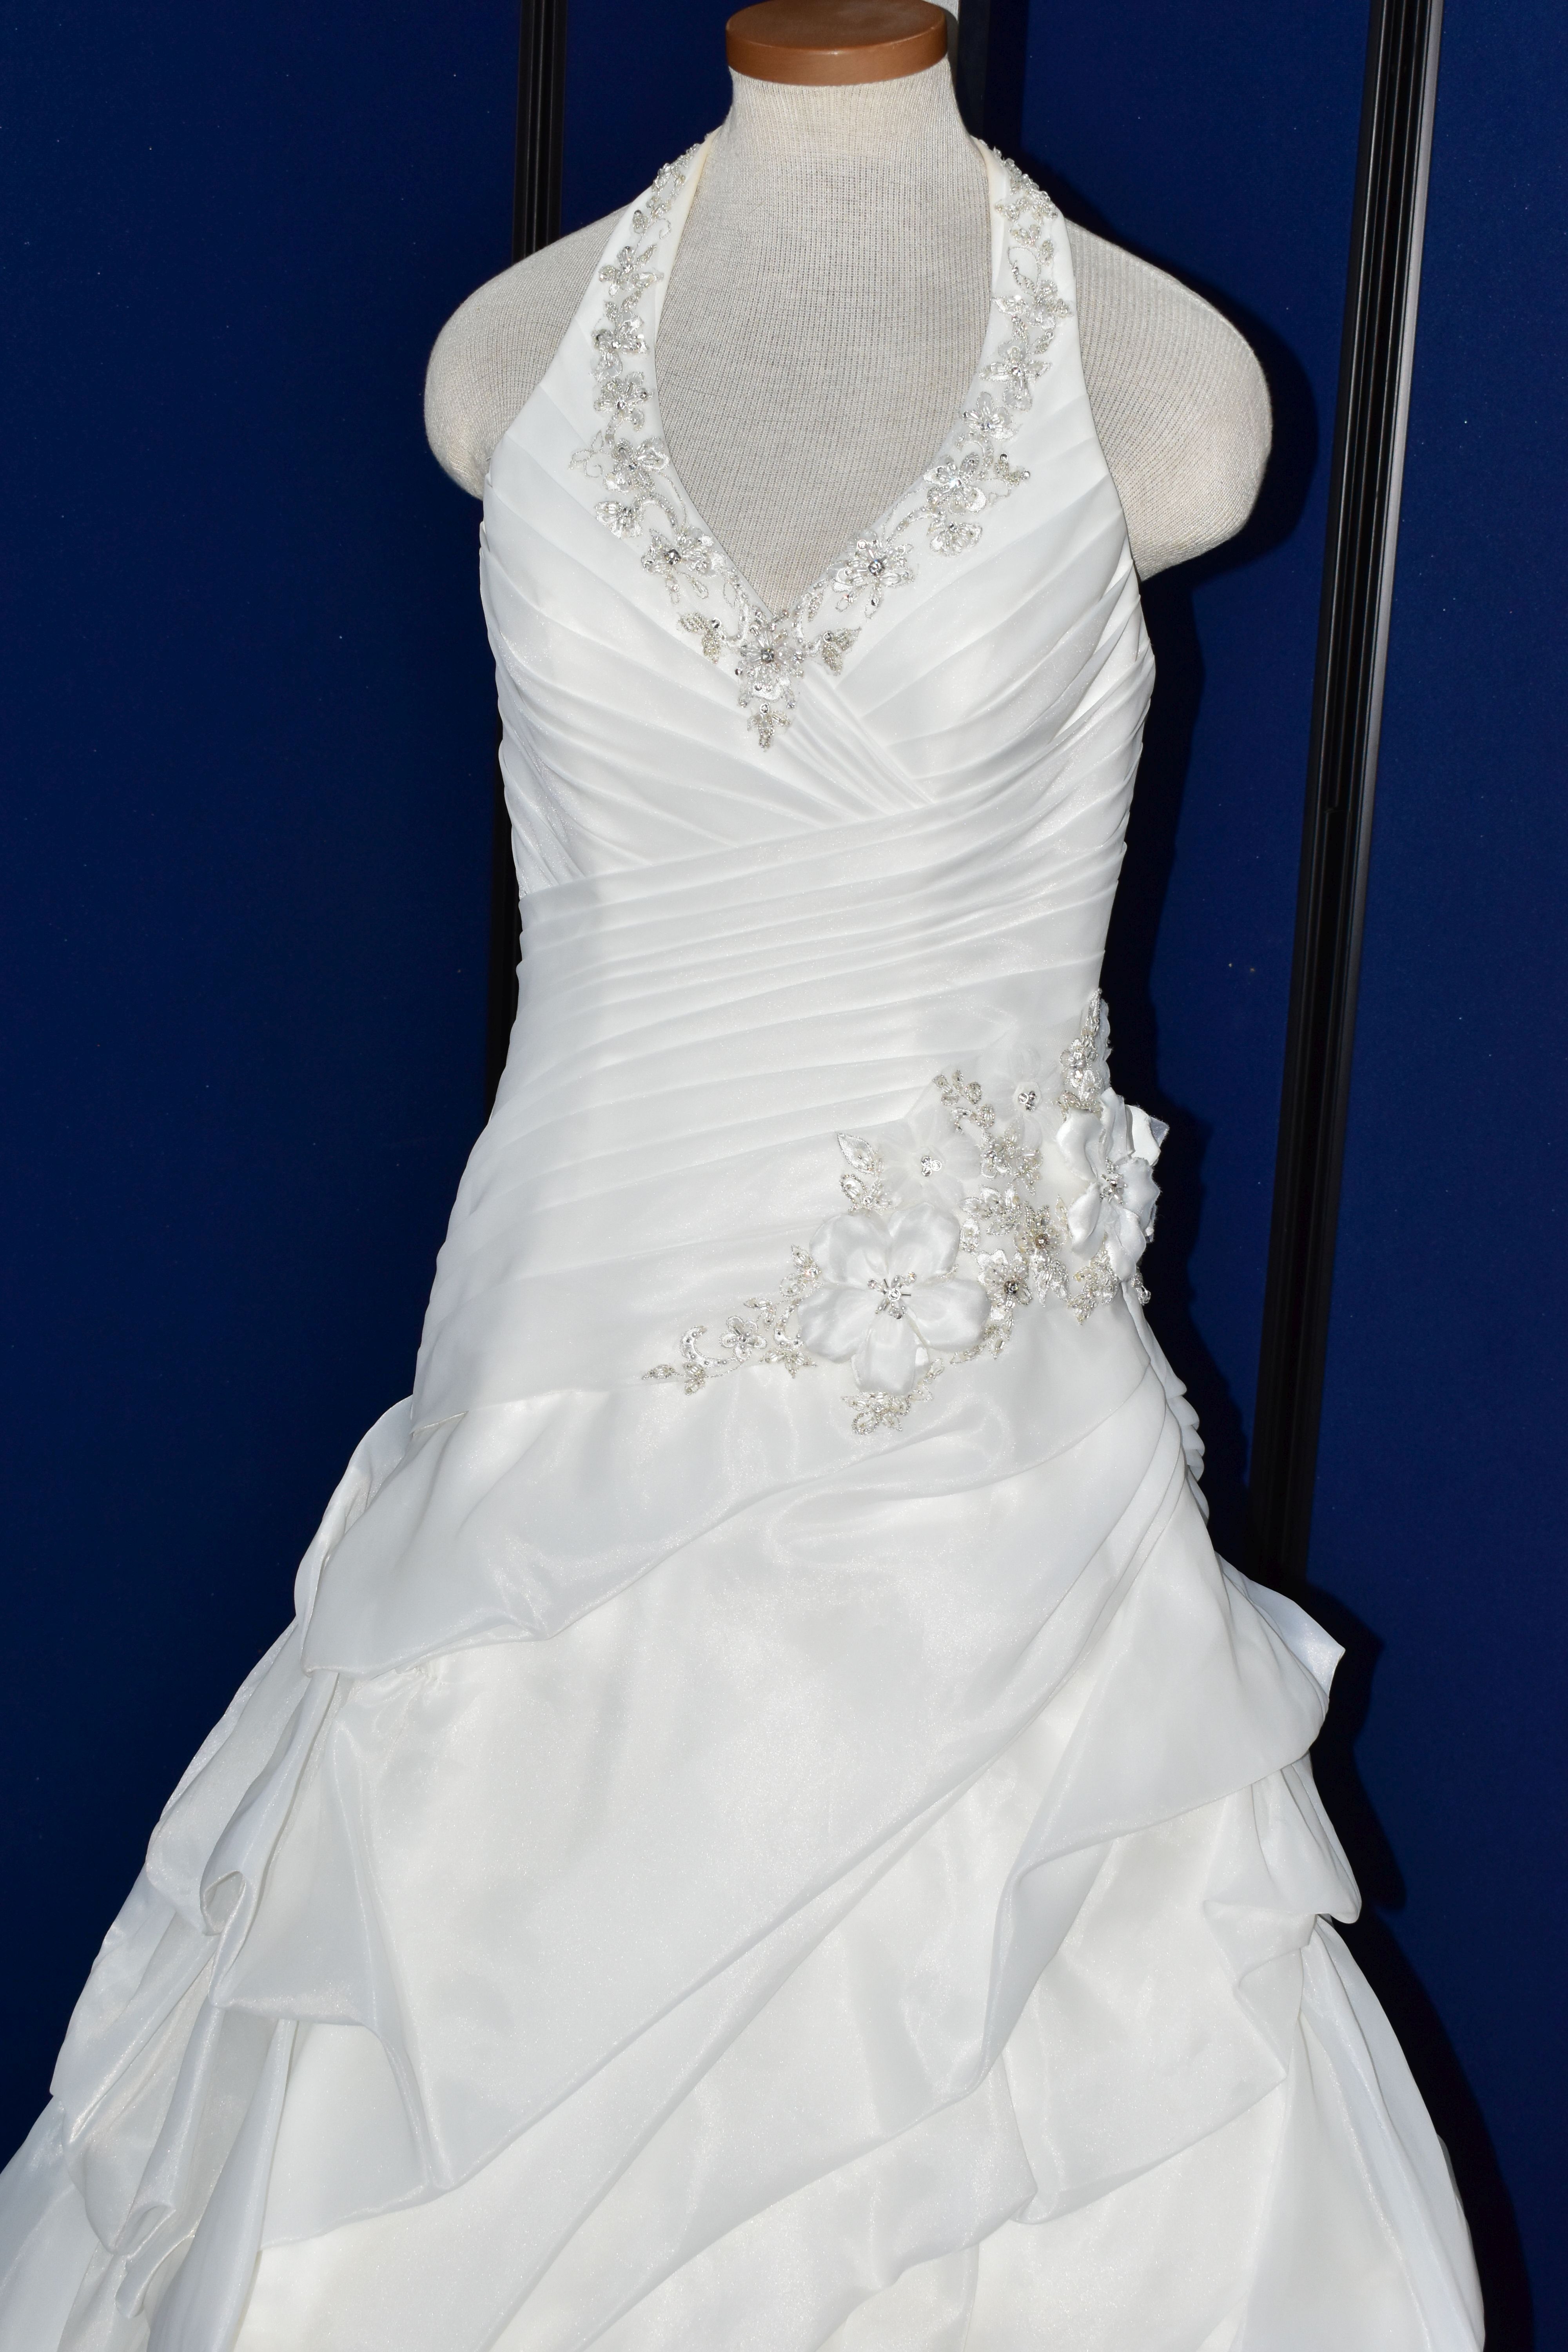 WEDDING GOWN, 'Kenneth Winston' Private Label by G, size 8/10, white pleated bodice, halter neck, - Image 2 of 17